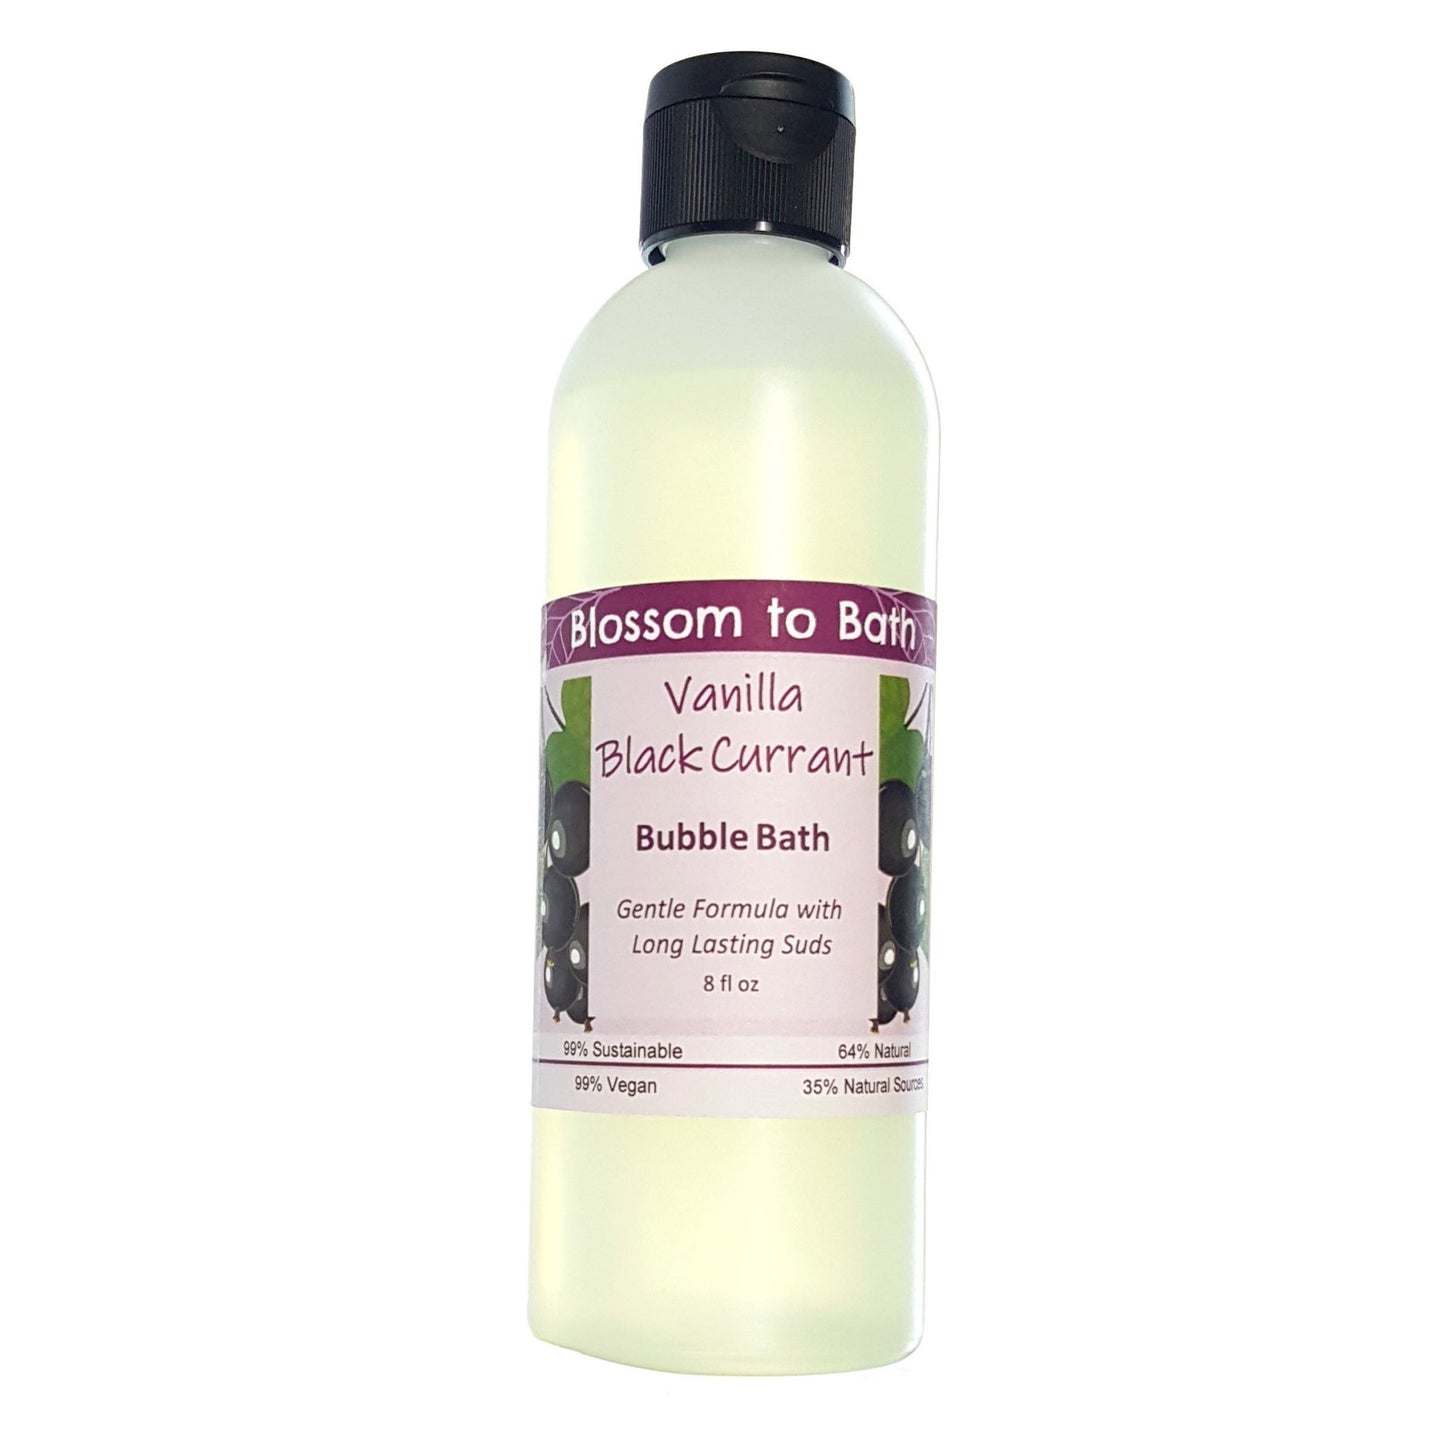 Buy Blossom to Bath Vanilla Black Currant Bubble Bath from Flowersong Soap Studio.  Lively, long lasting luxury bubbles in a gentle plant based formula for maximum relaxation time  A sensuous rich berry scent with a hint of vanilla and a twist of freshness.